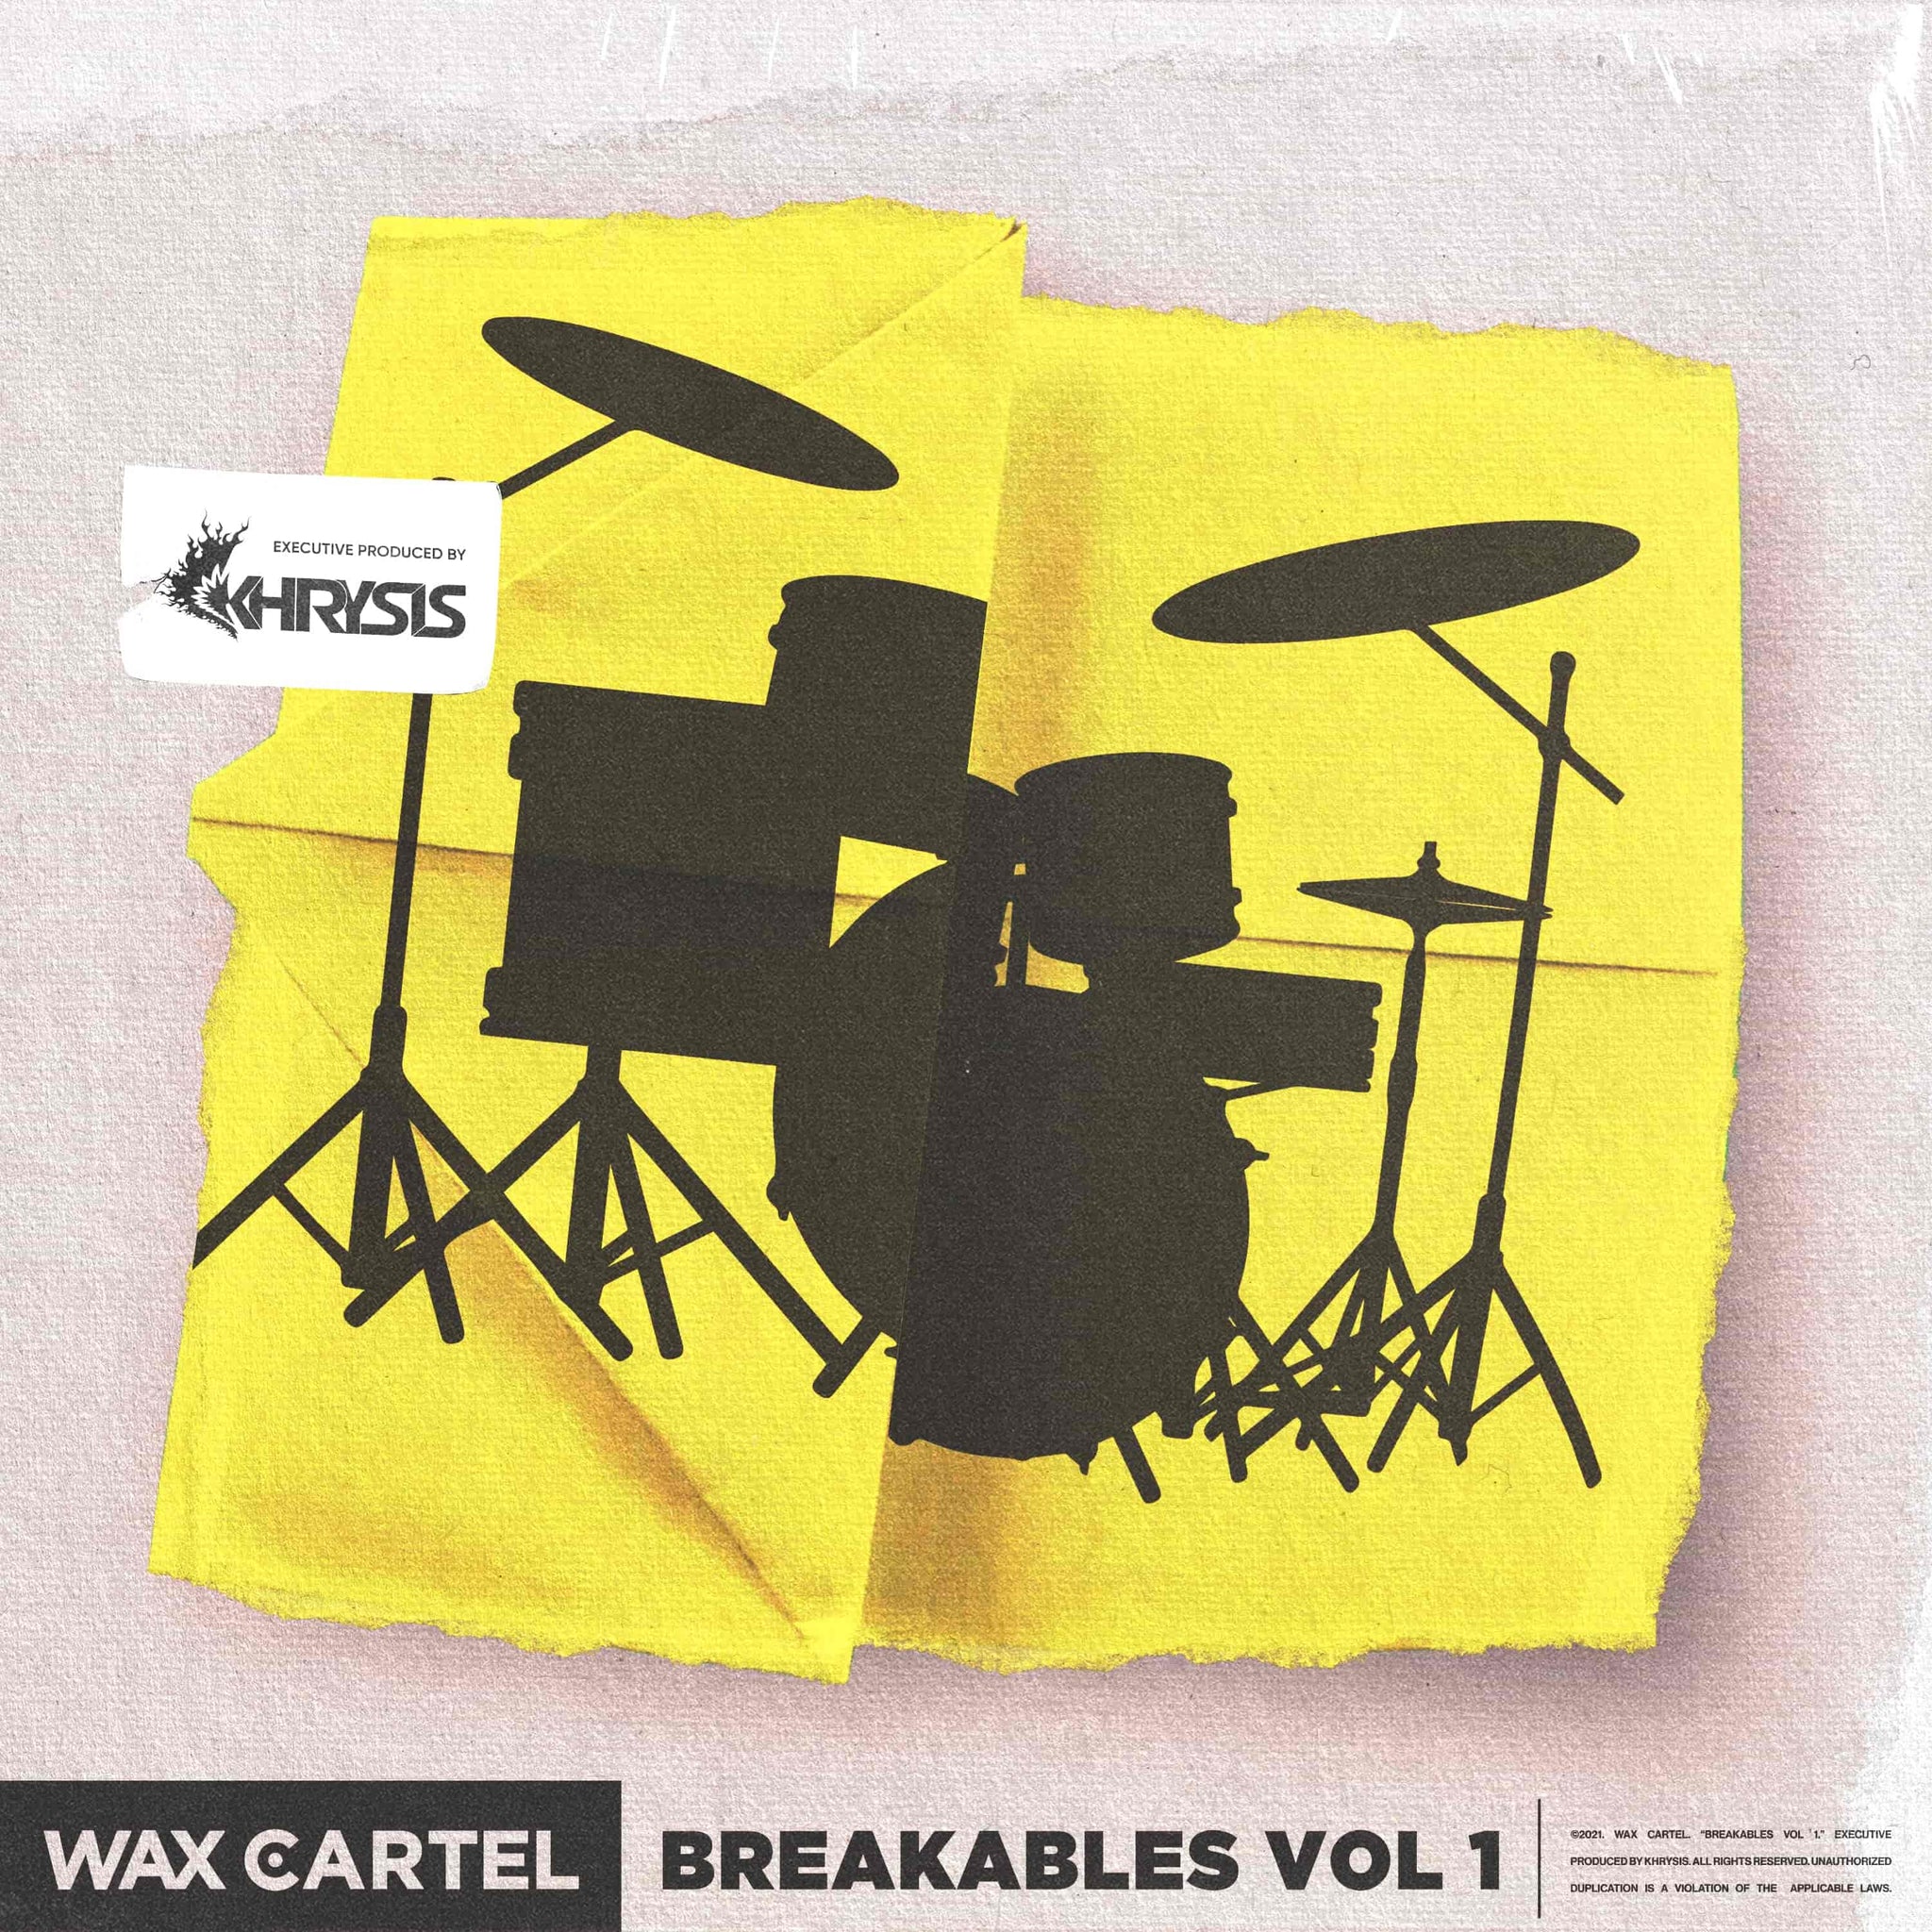 Product cover featuring yellow backdrop with black drum silhouette titled "Breakables one". This drum break kit is featuring Khrysis, producer for Jamla Records and member of 9th Wonder's Soul Council.